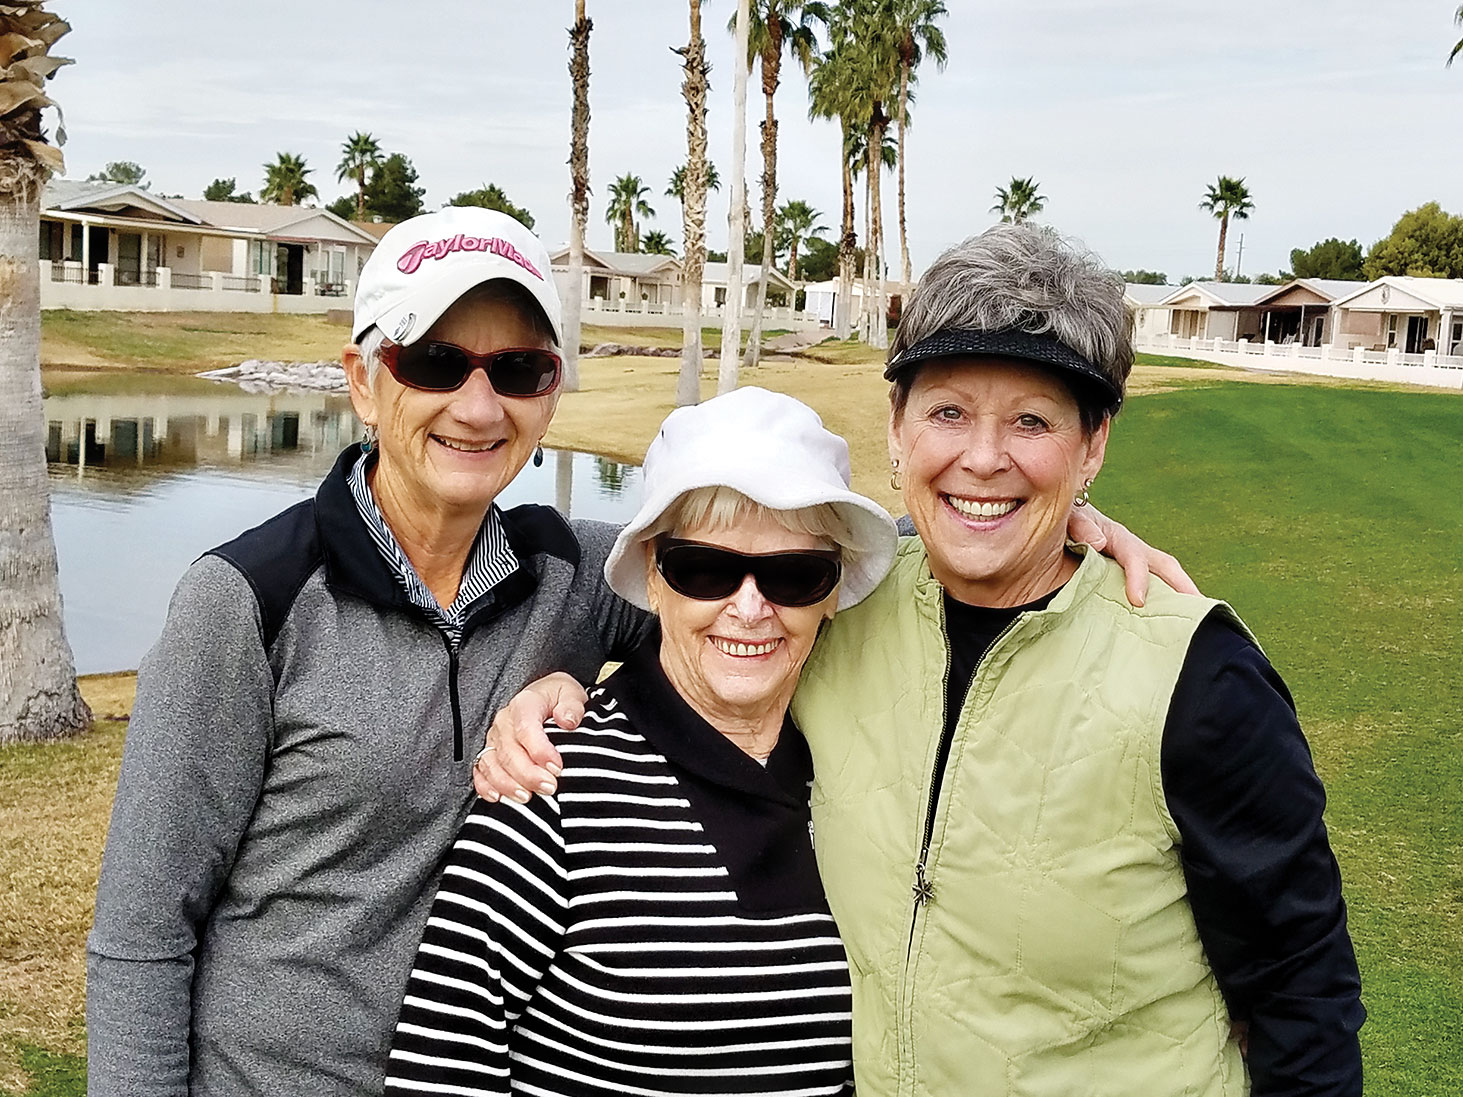 Left to right: Margie Leach, June Yates, Connie Lundeen